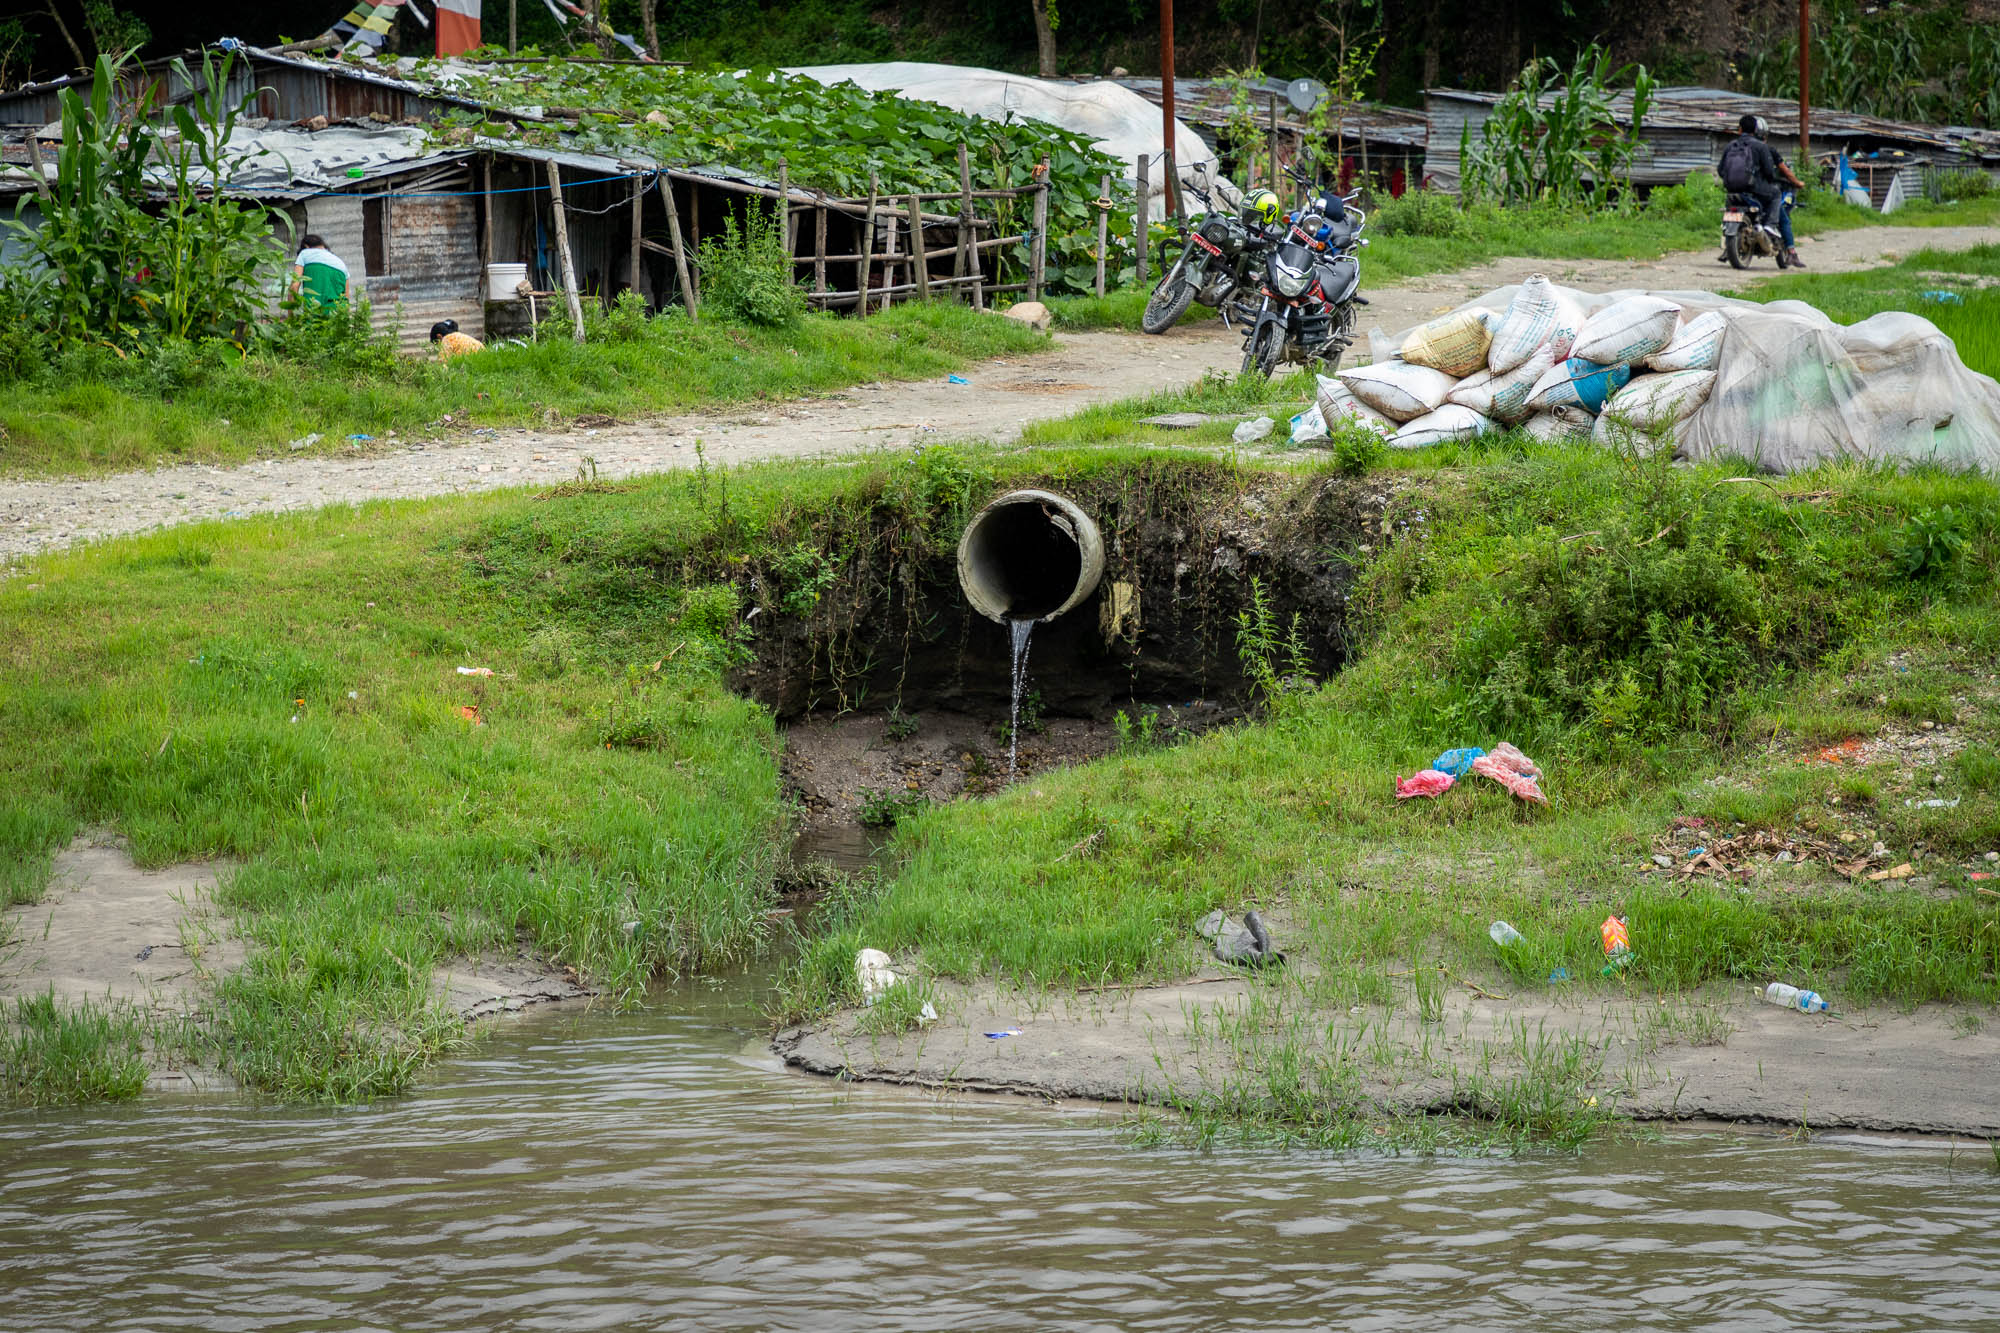 Wastewater flows from an open sewer pipe into the Bagmati River in Gokarneshwar Municipality.